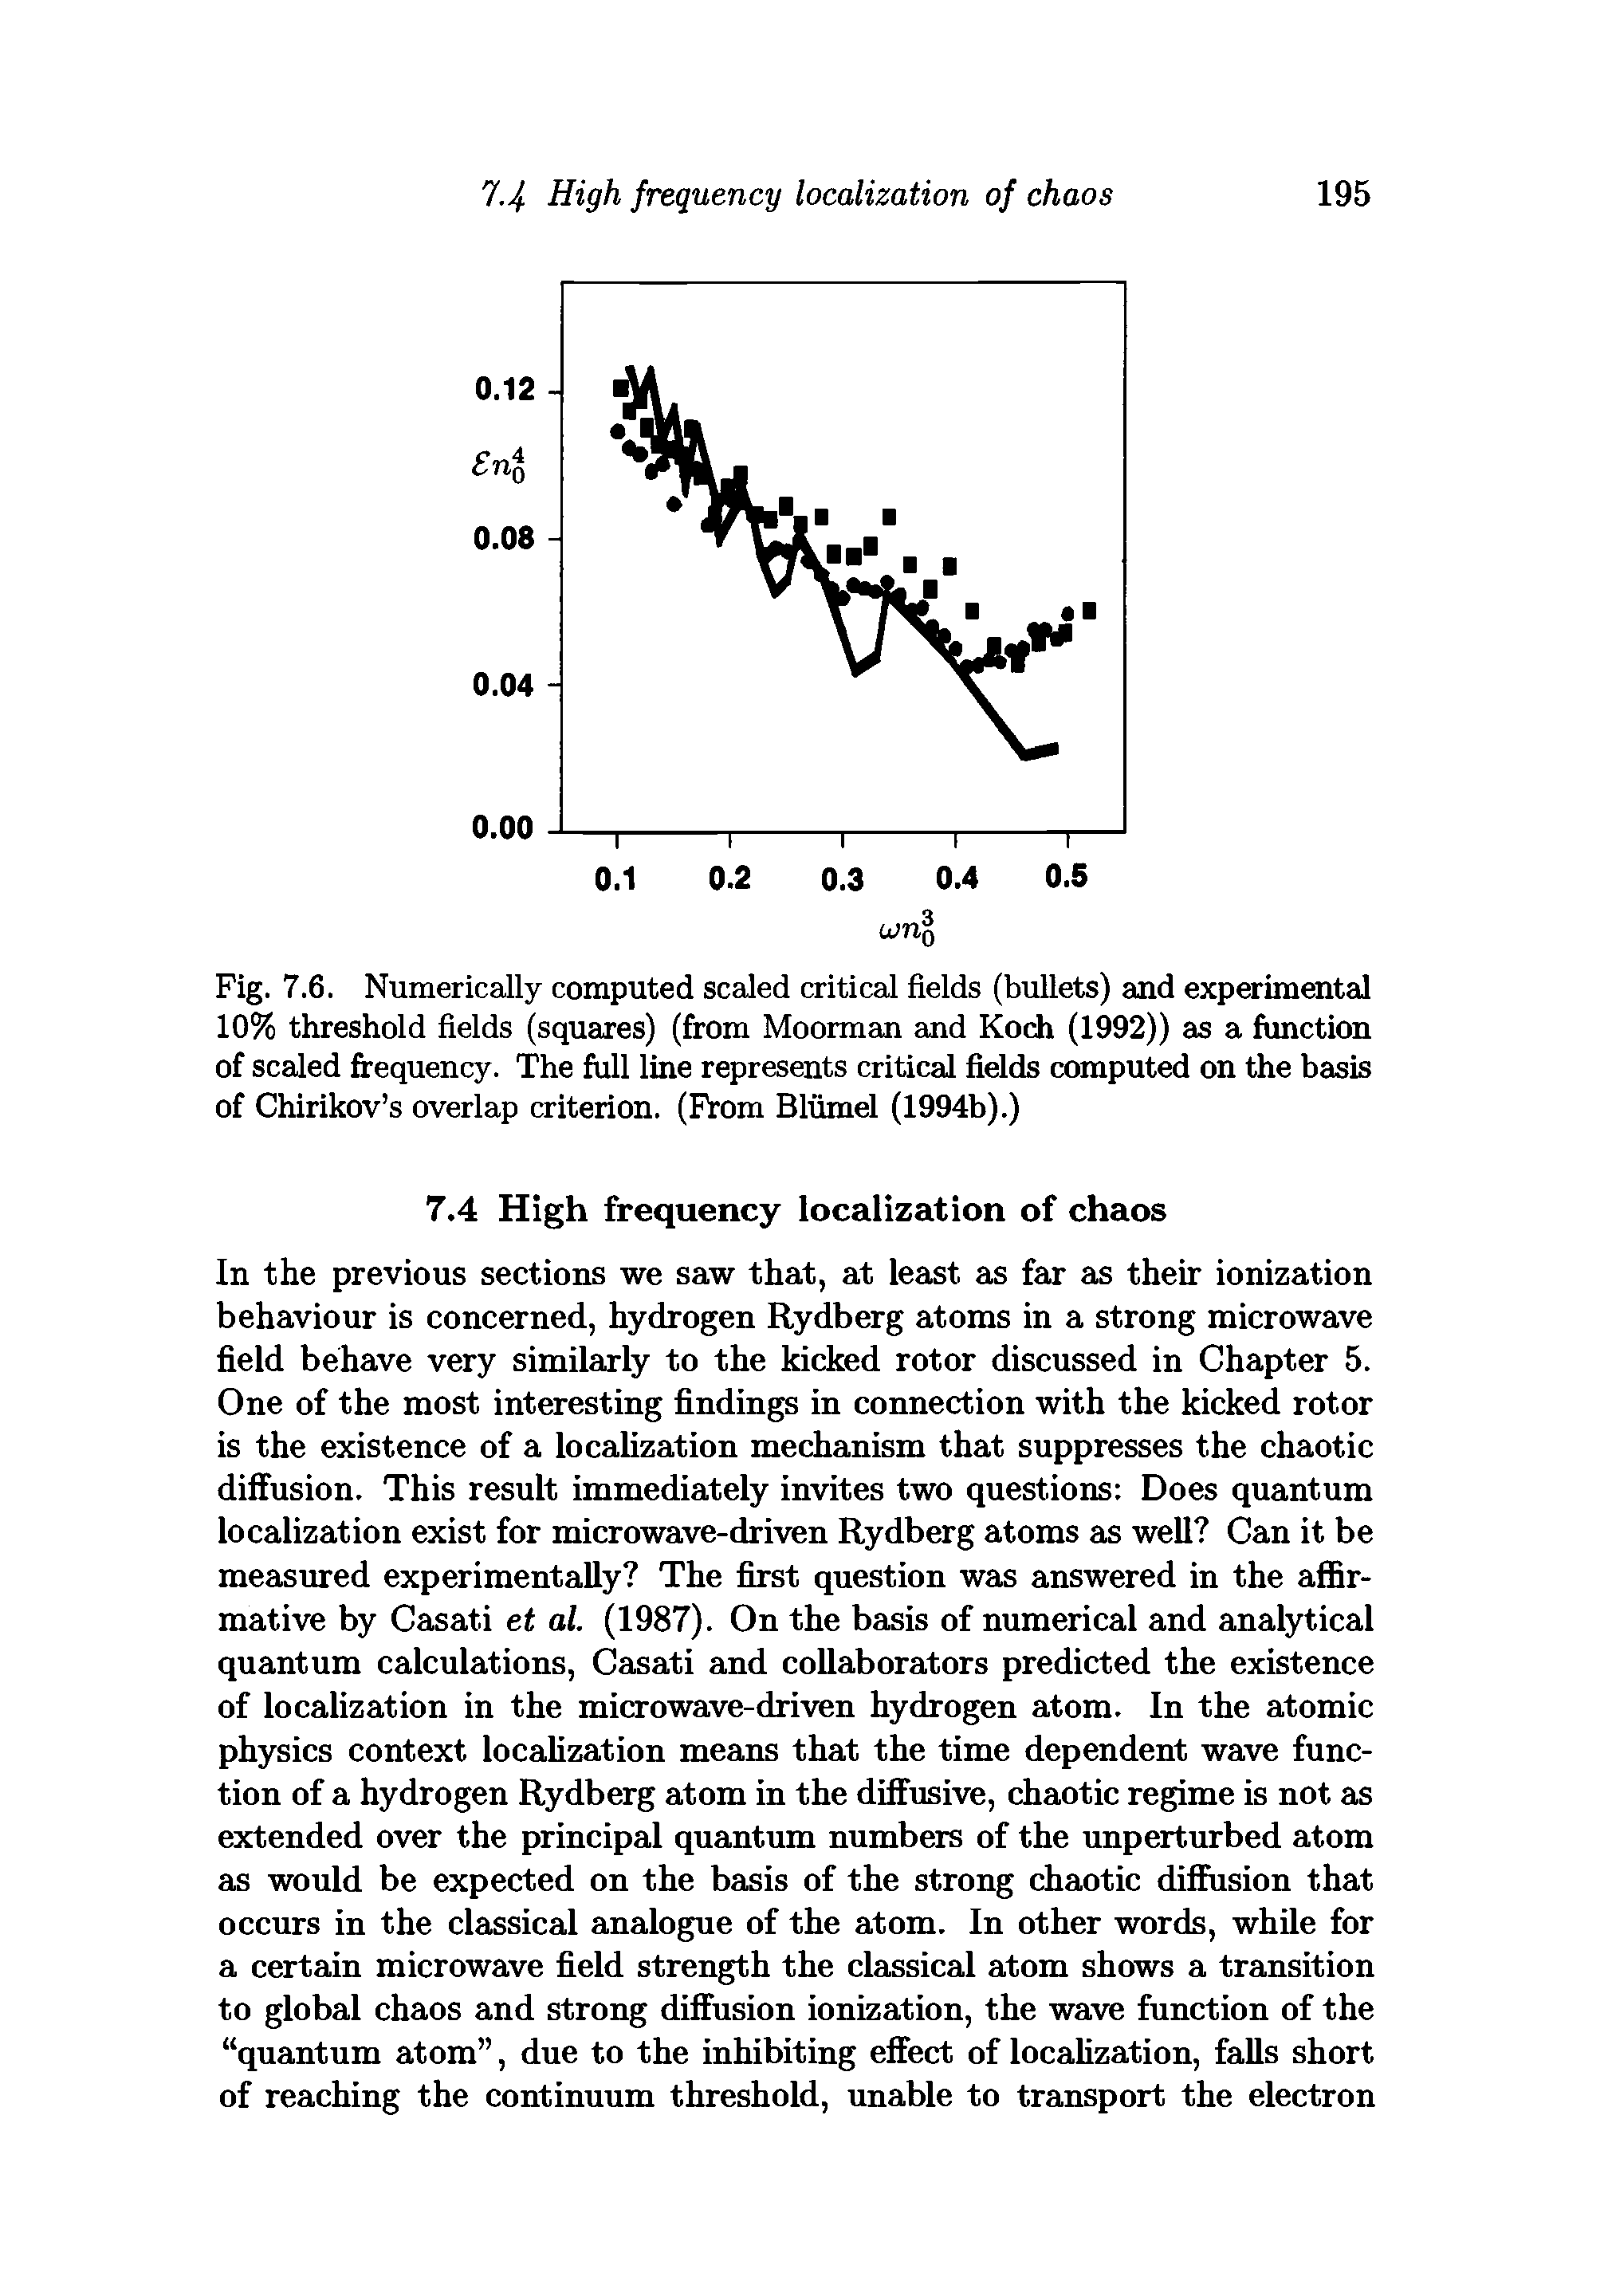 Fig. 7.6. Numerically computed scaled critical fields (bullets) and experimental 10% threshold fields (squares) (from Moorman and Koch (1992)) as a function of scaled frequency. The full line represents critical fields computed on the basis of Chirikov s overlap criterion. (From Blumel (1994b).)...